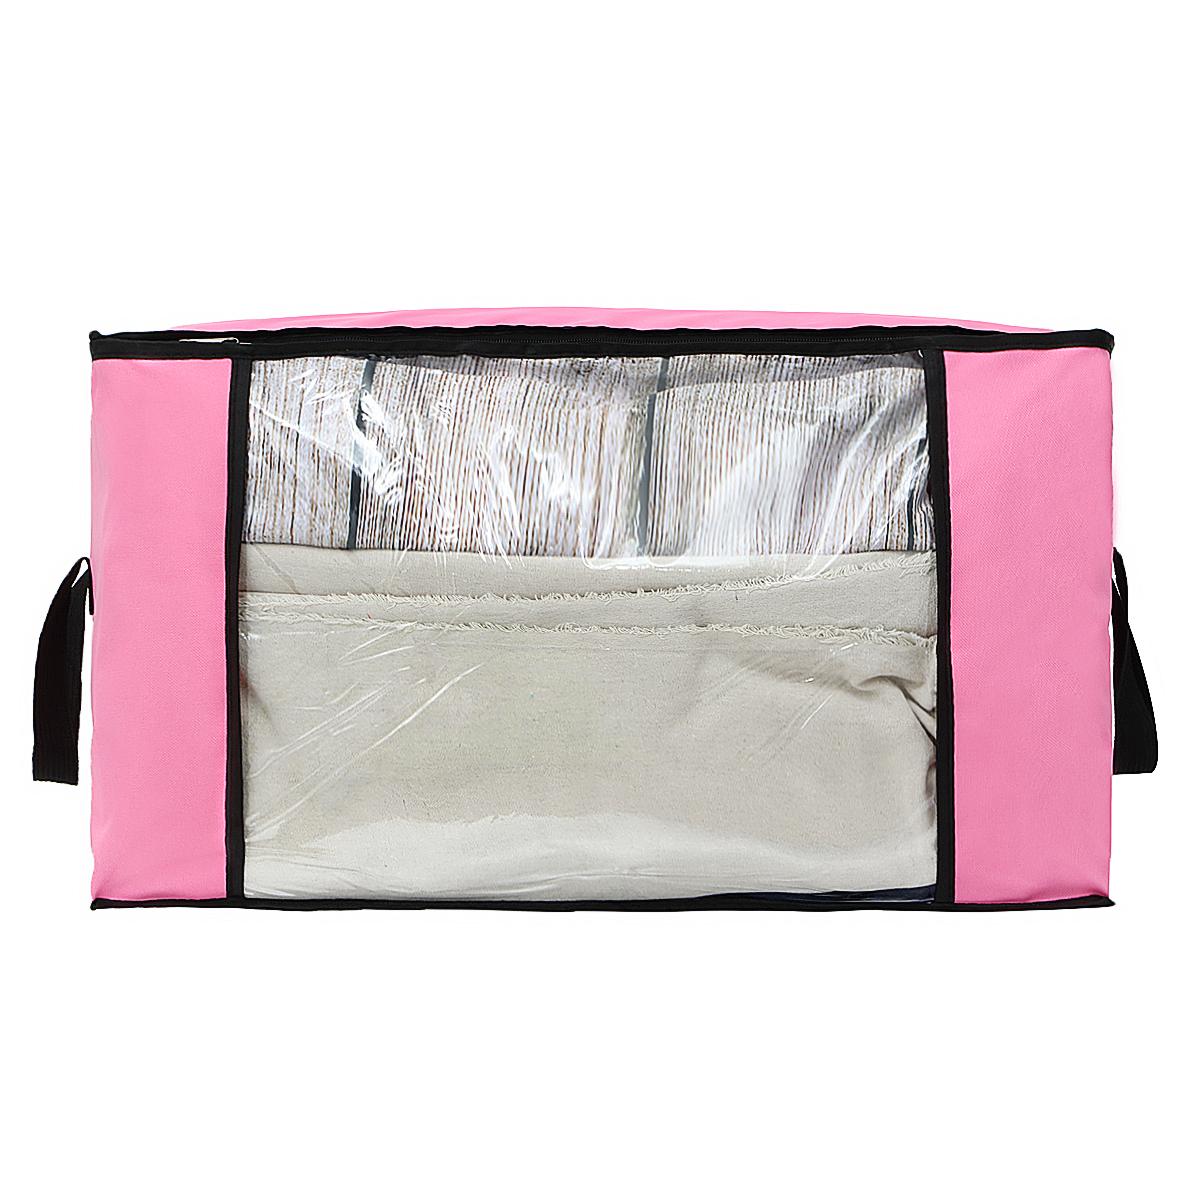 KING-DO-WAY-34-Pcs-90L-Clothing-Storage-Bags-Zipped-Clothes-Organizers-Quilts-Blankets-Bedding-Handb-1855896-8